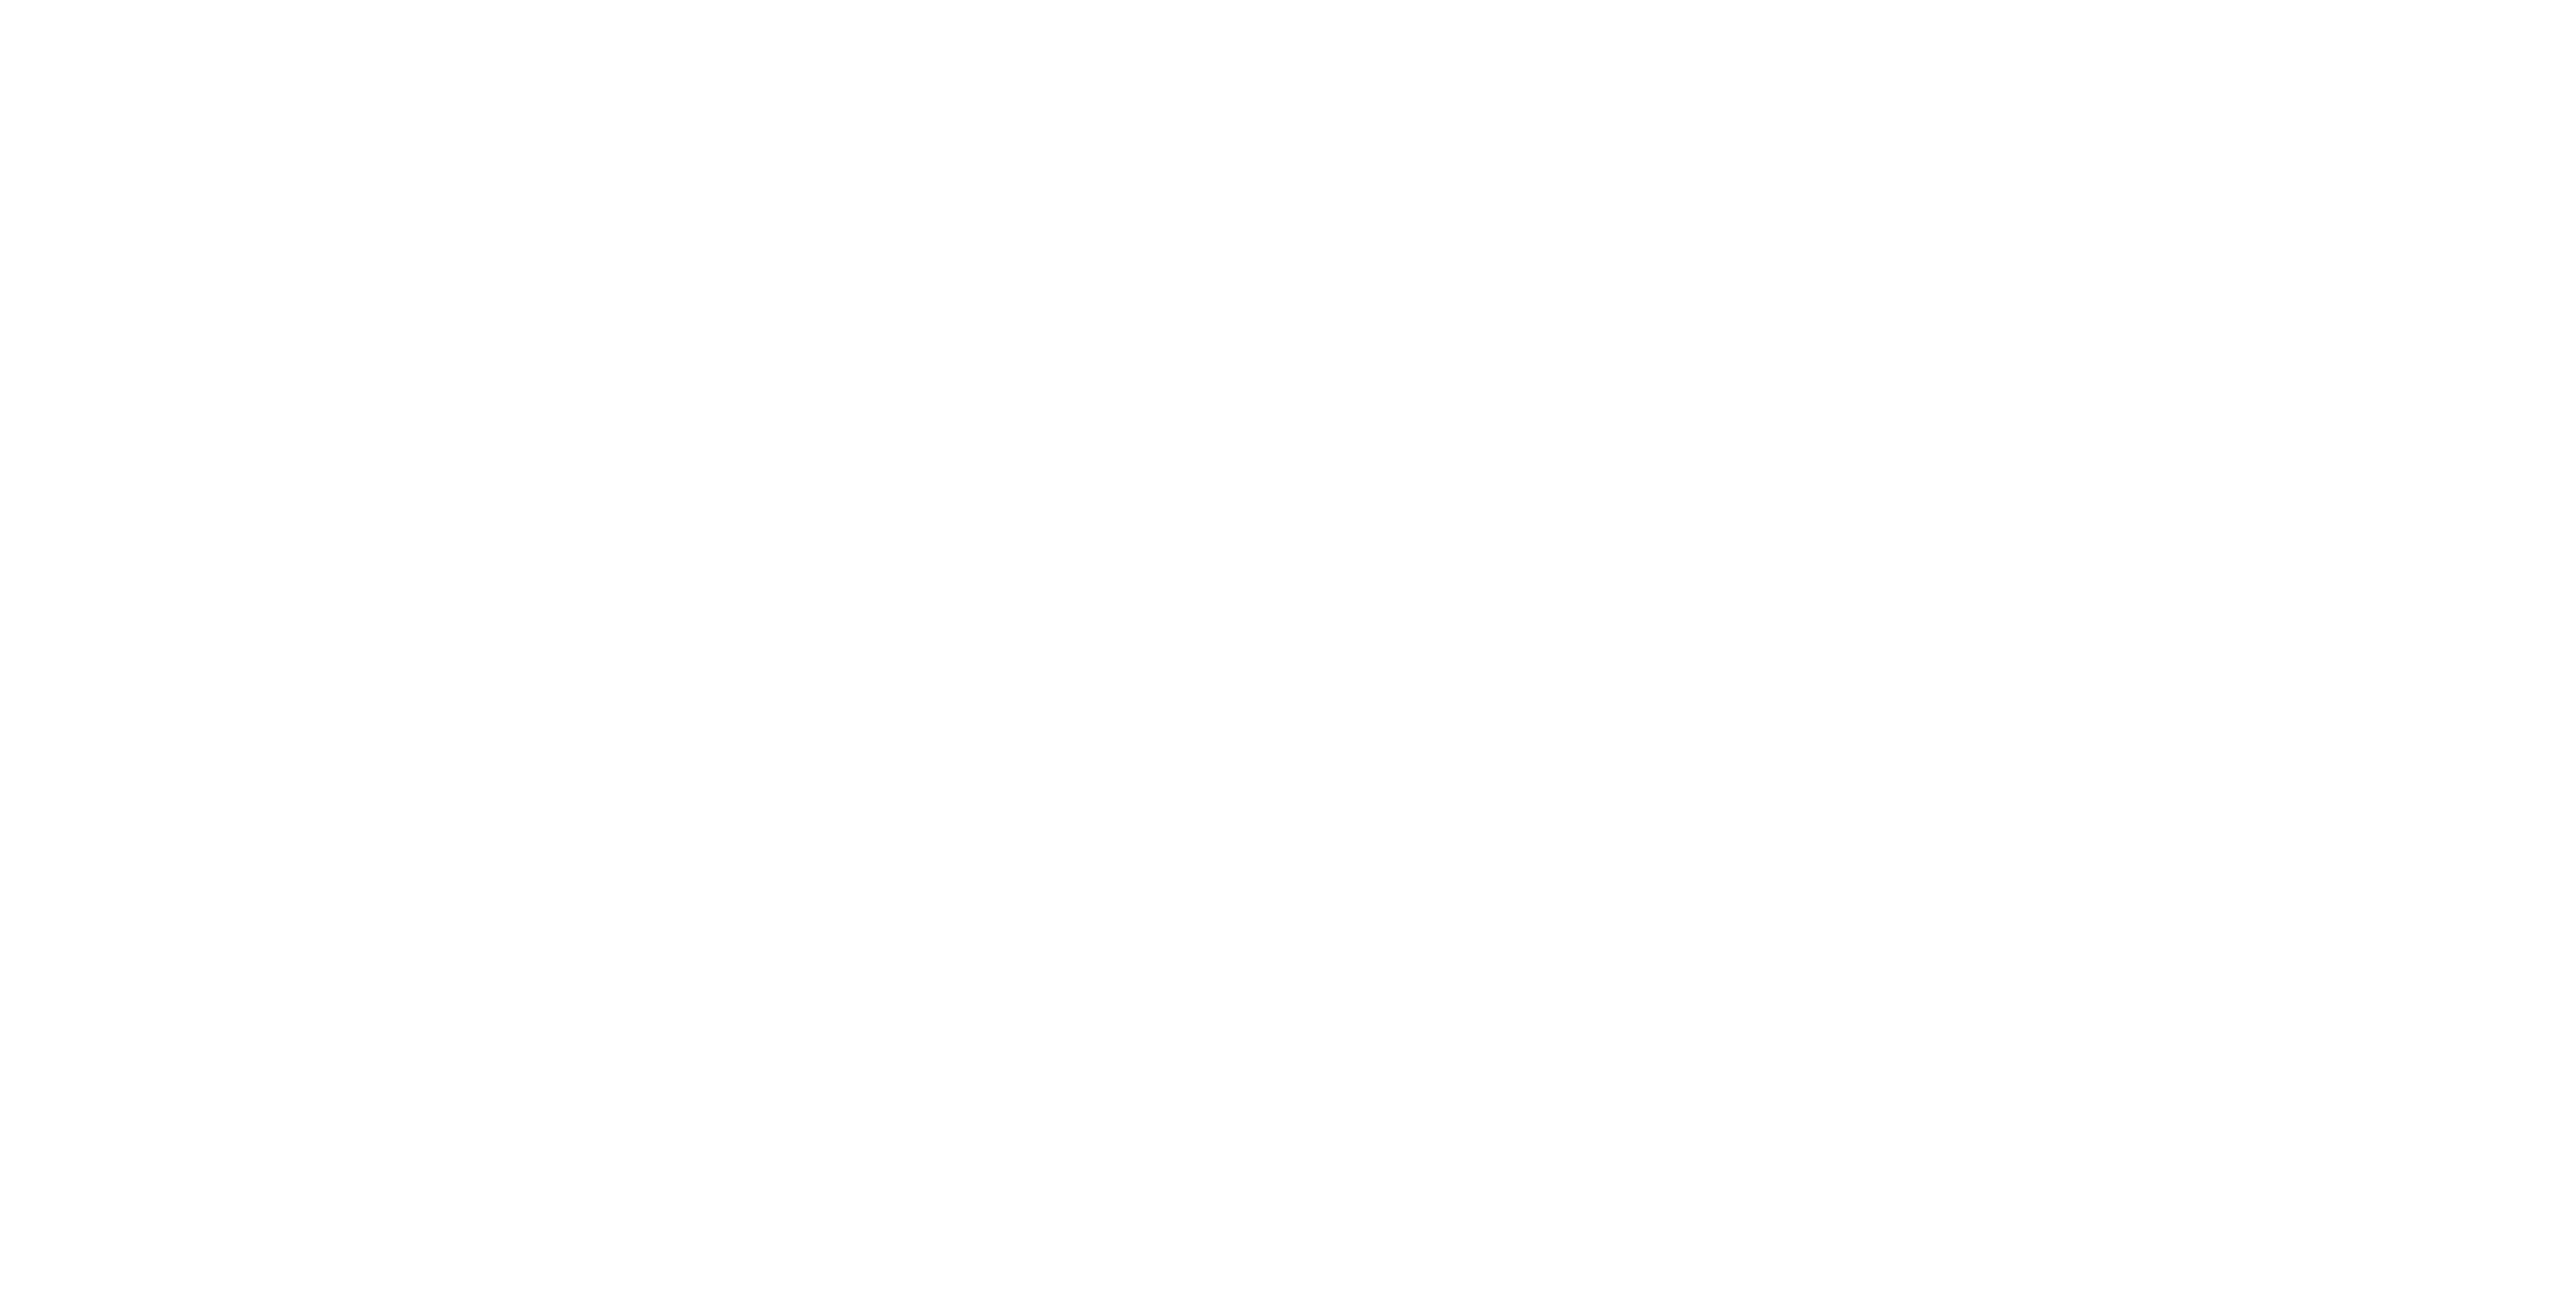 Premier House Cleaning